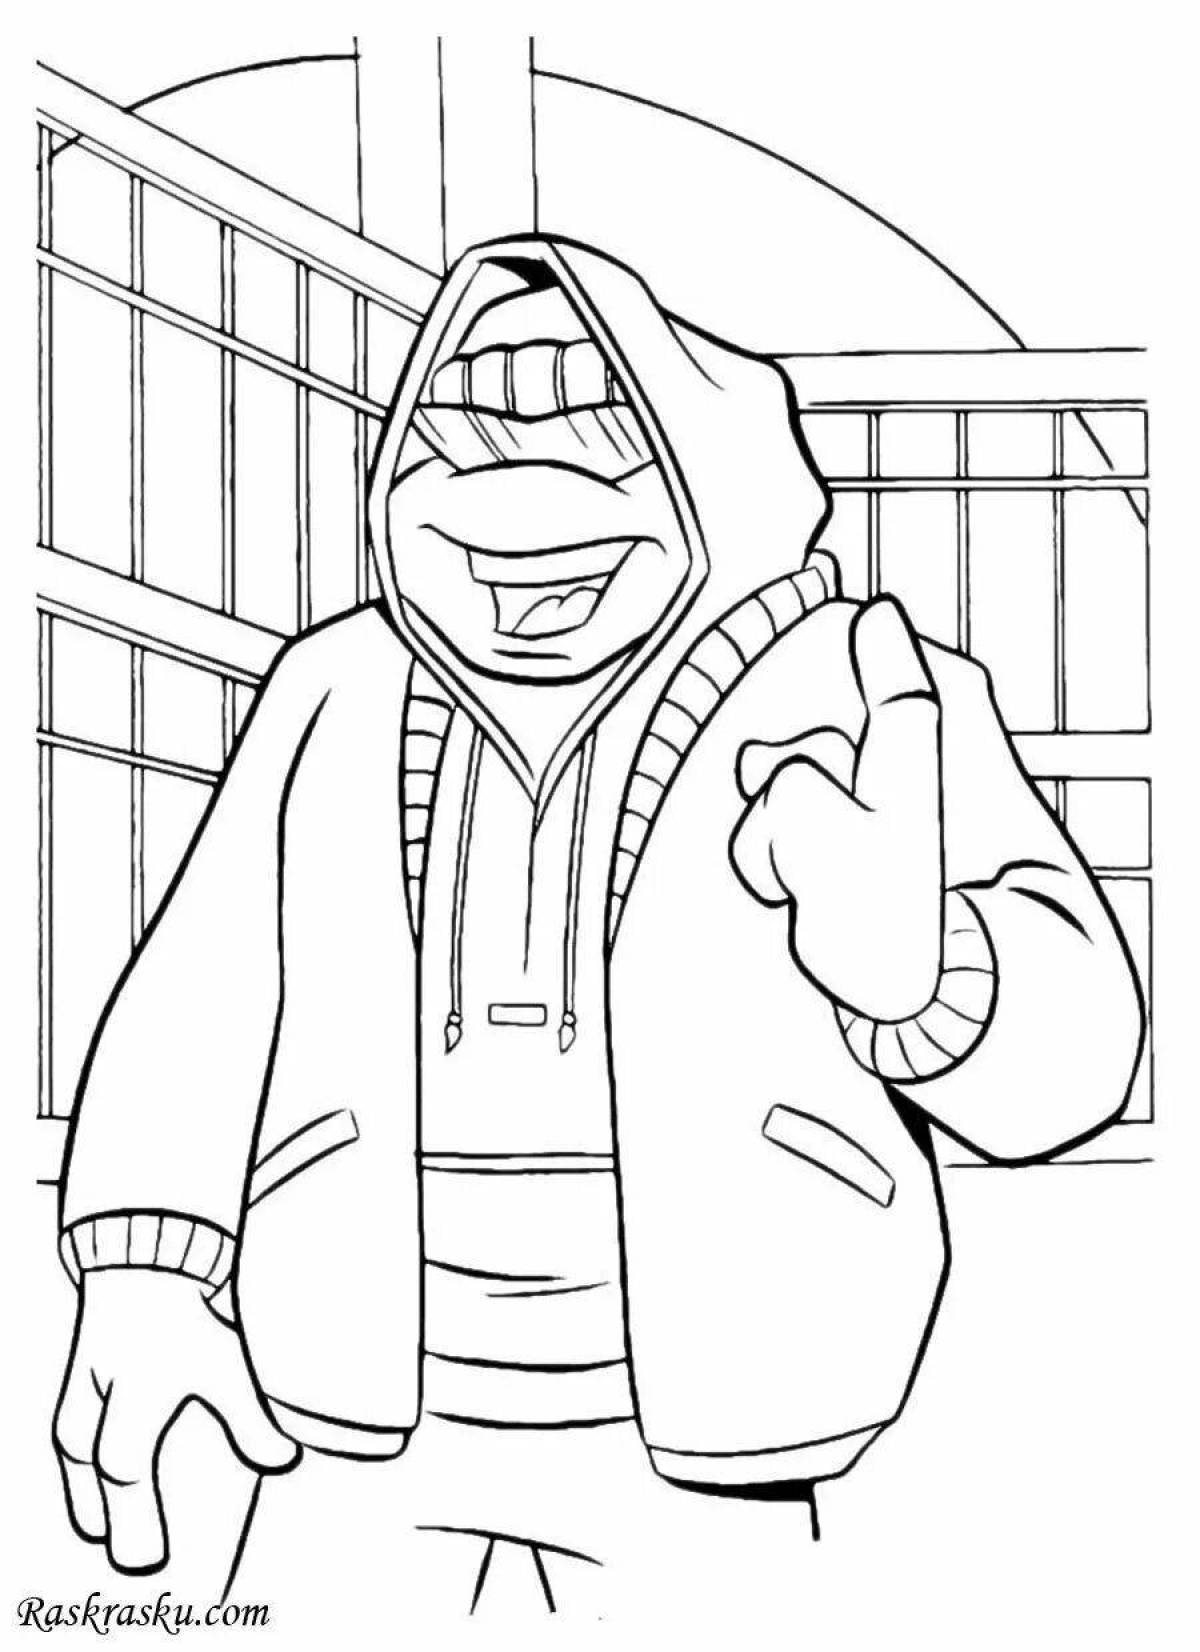 Incredible gujutsu character coloring pages for kids